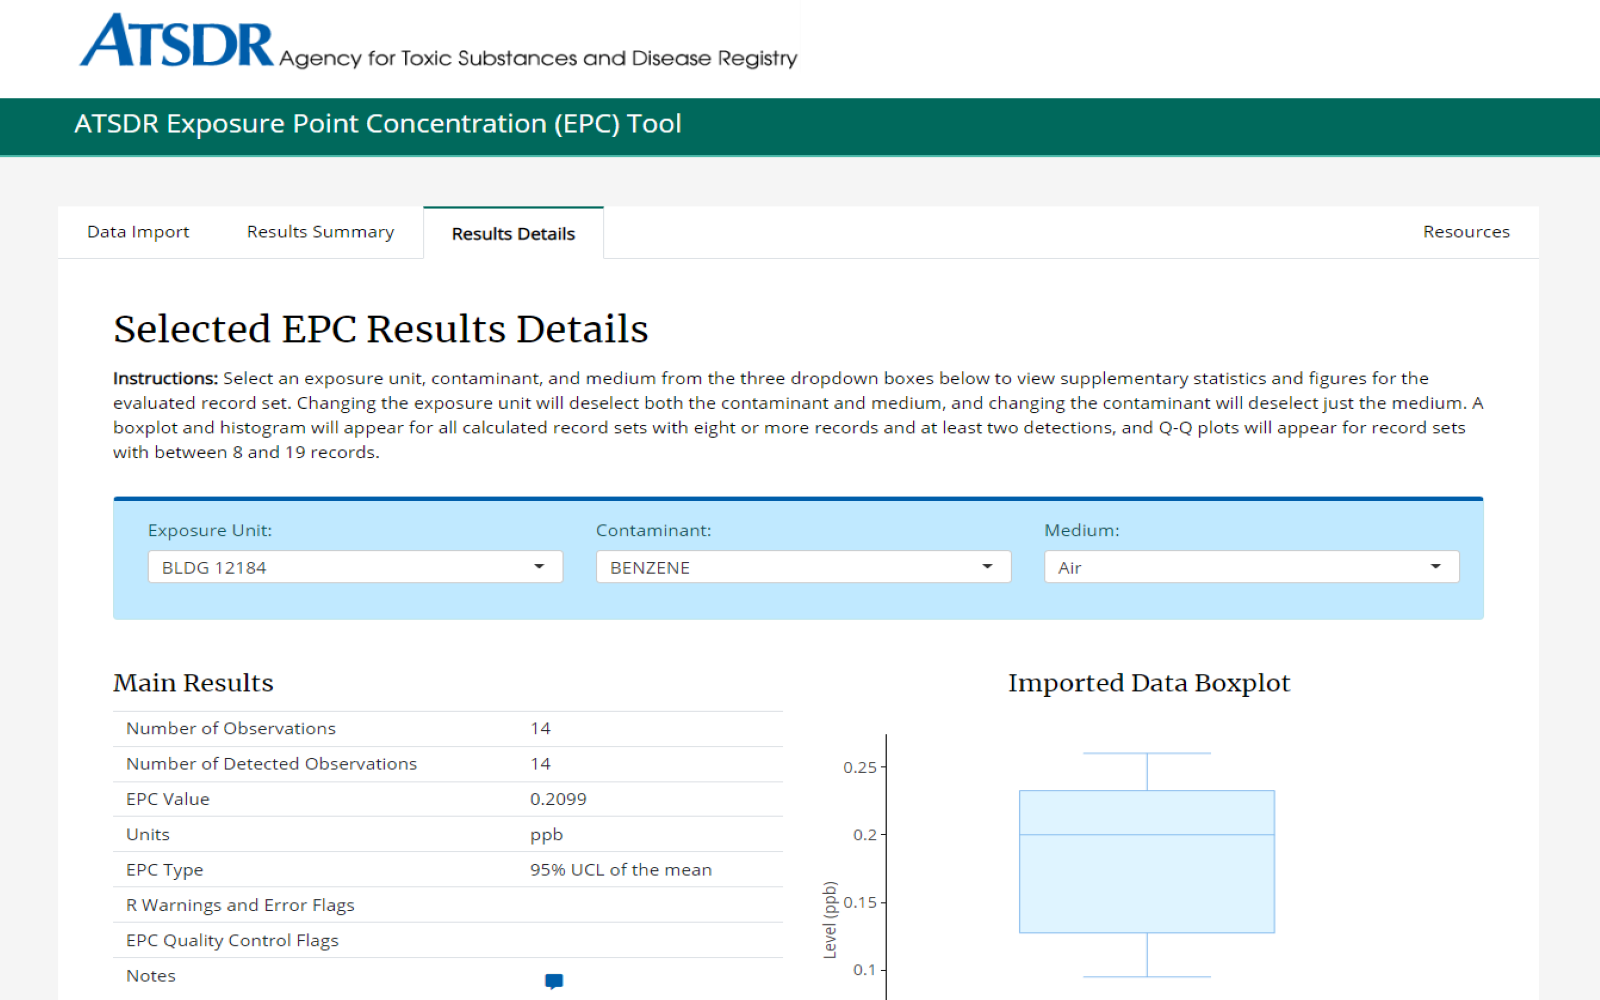 Selected EPC Results Details page of the tool